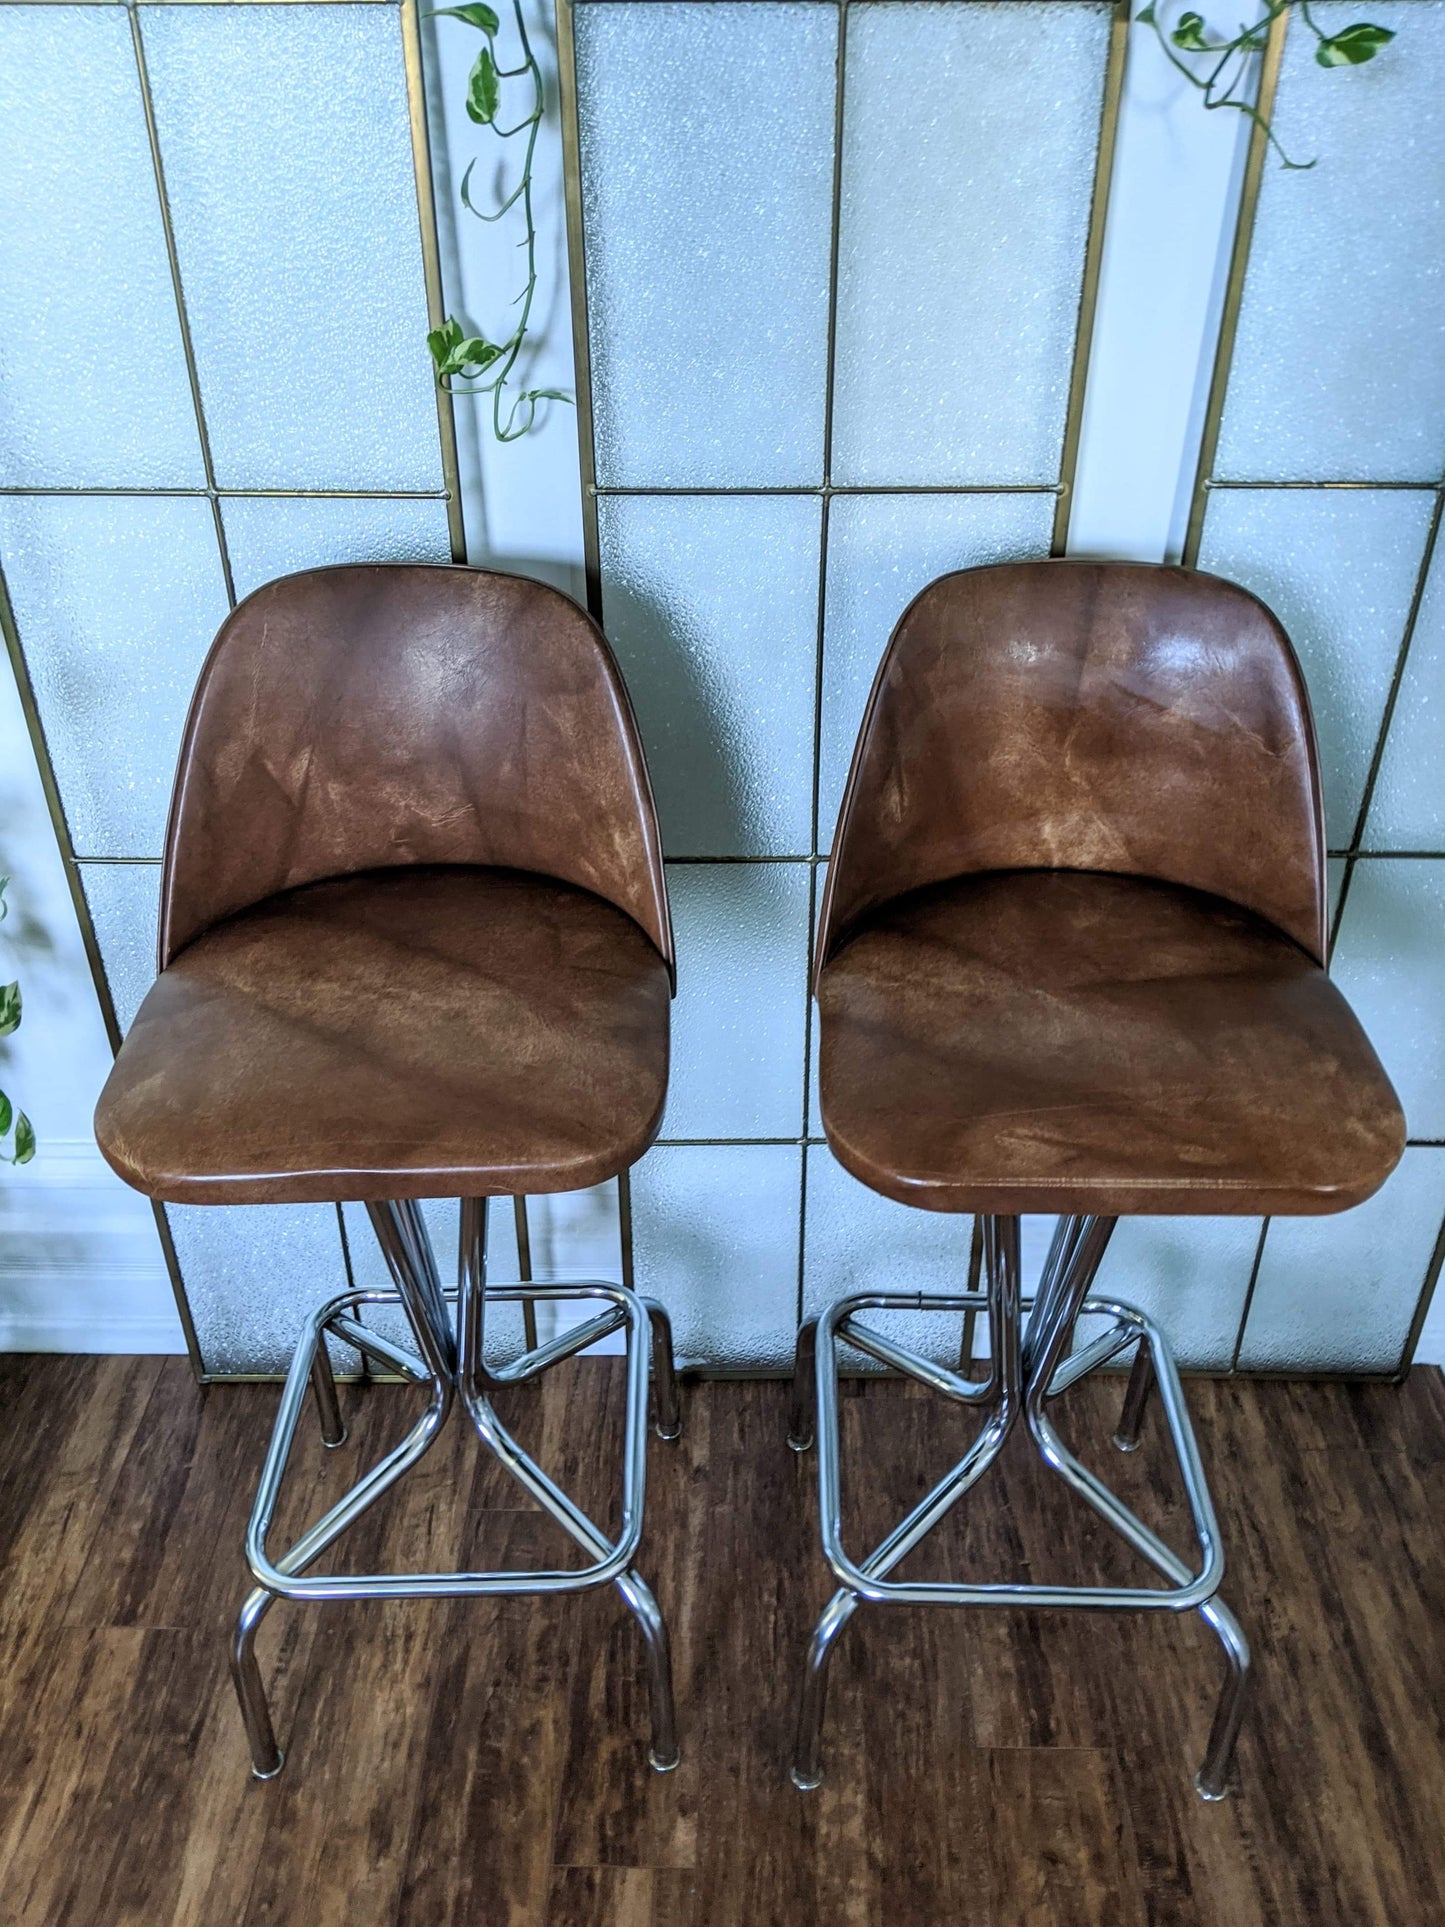 The 70’s Lounge Stools